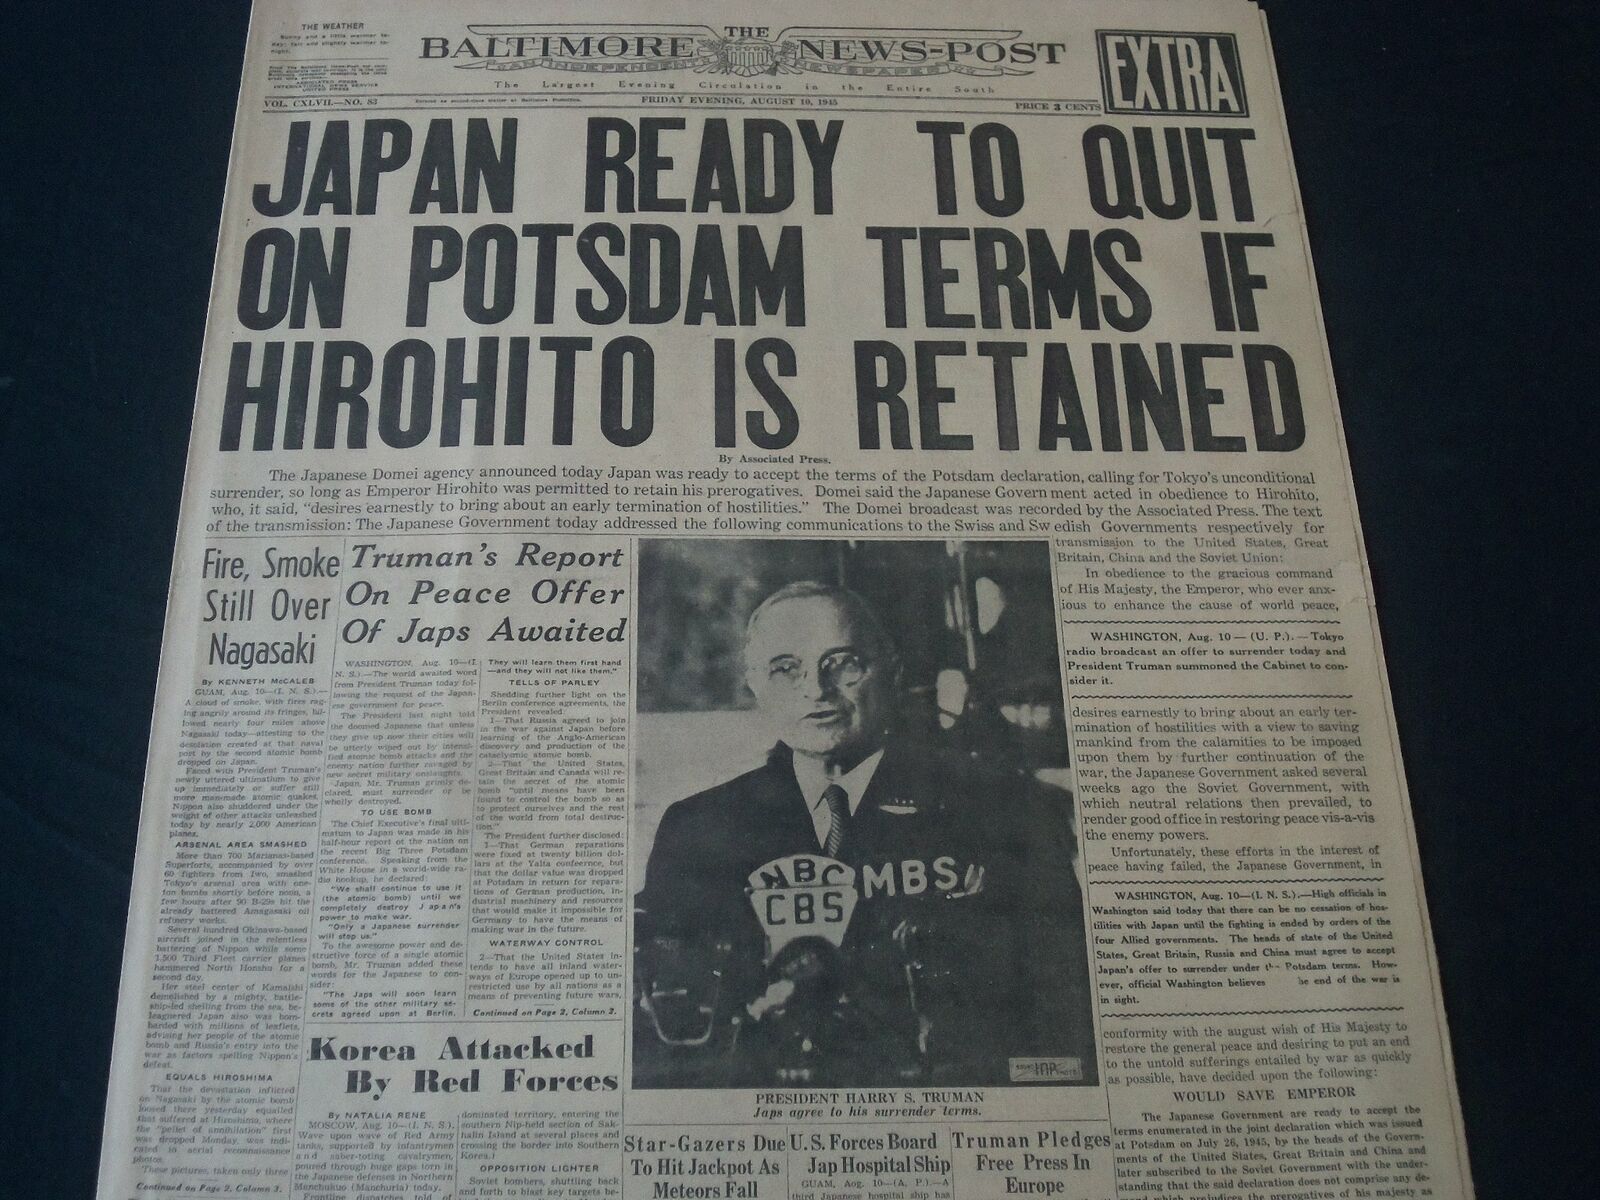 1945 AUGUST 10 BALTIMORE NEWS NEWSPAPER - JAPAN READY TO QUIT - NT 7317